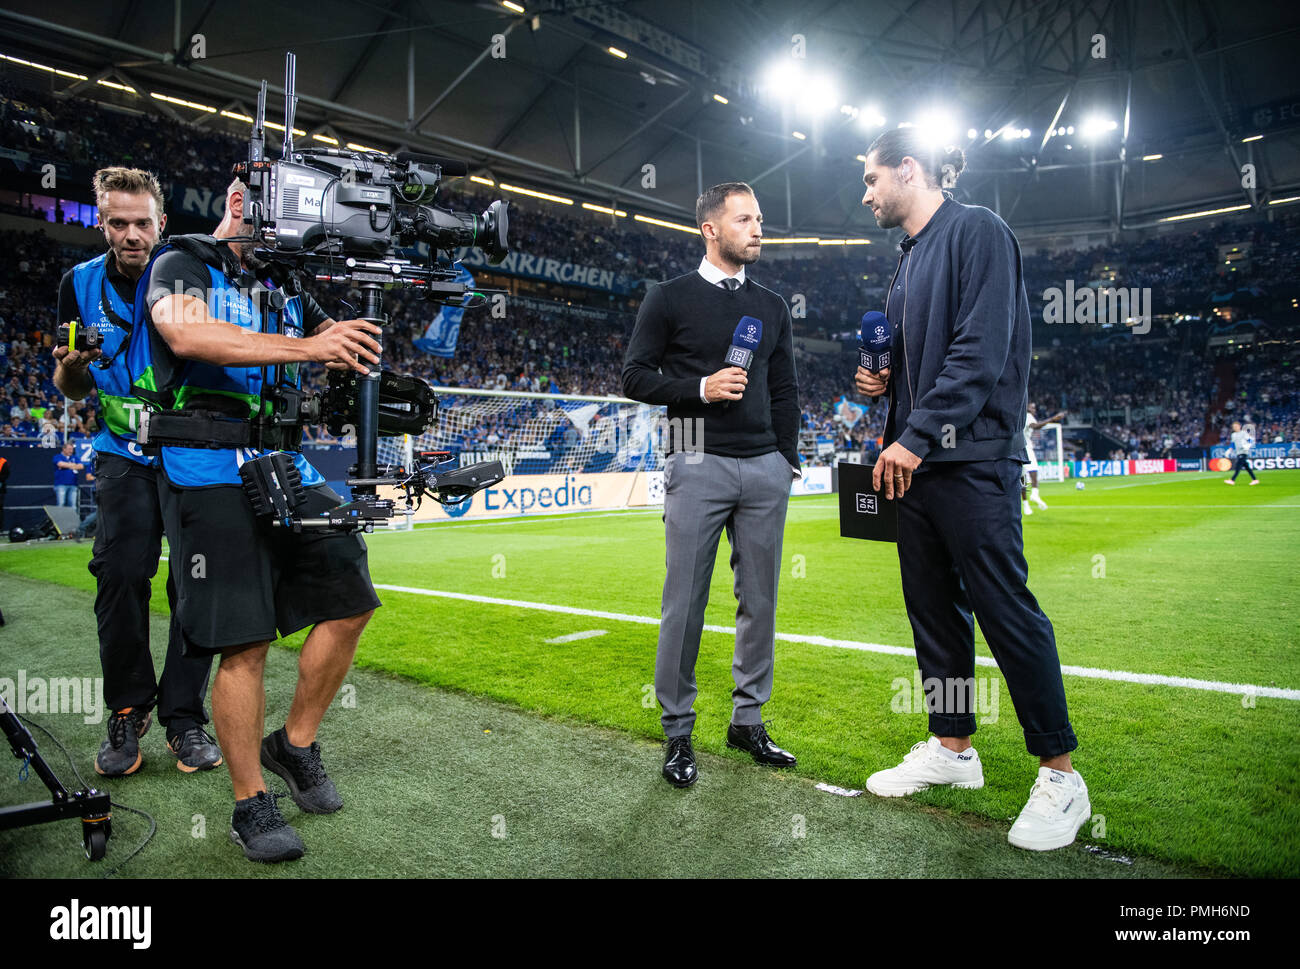 Trainer Domenico Tedesco Schalke 04 High Resolution Stock Photography and  Images - Alamy